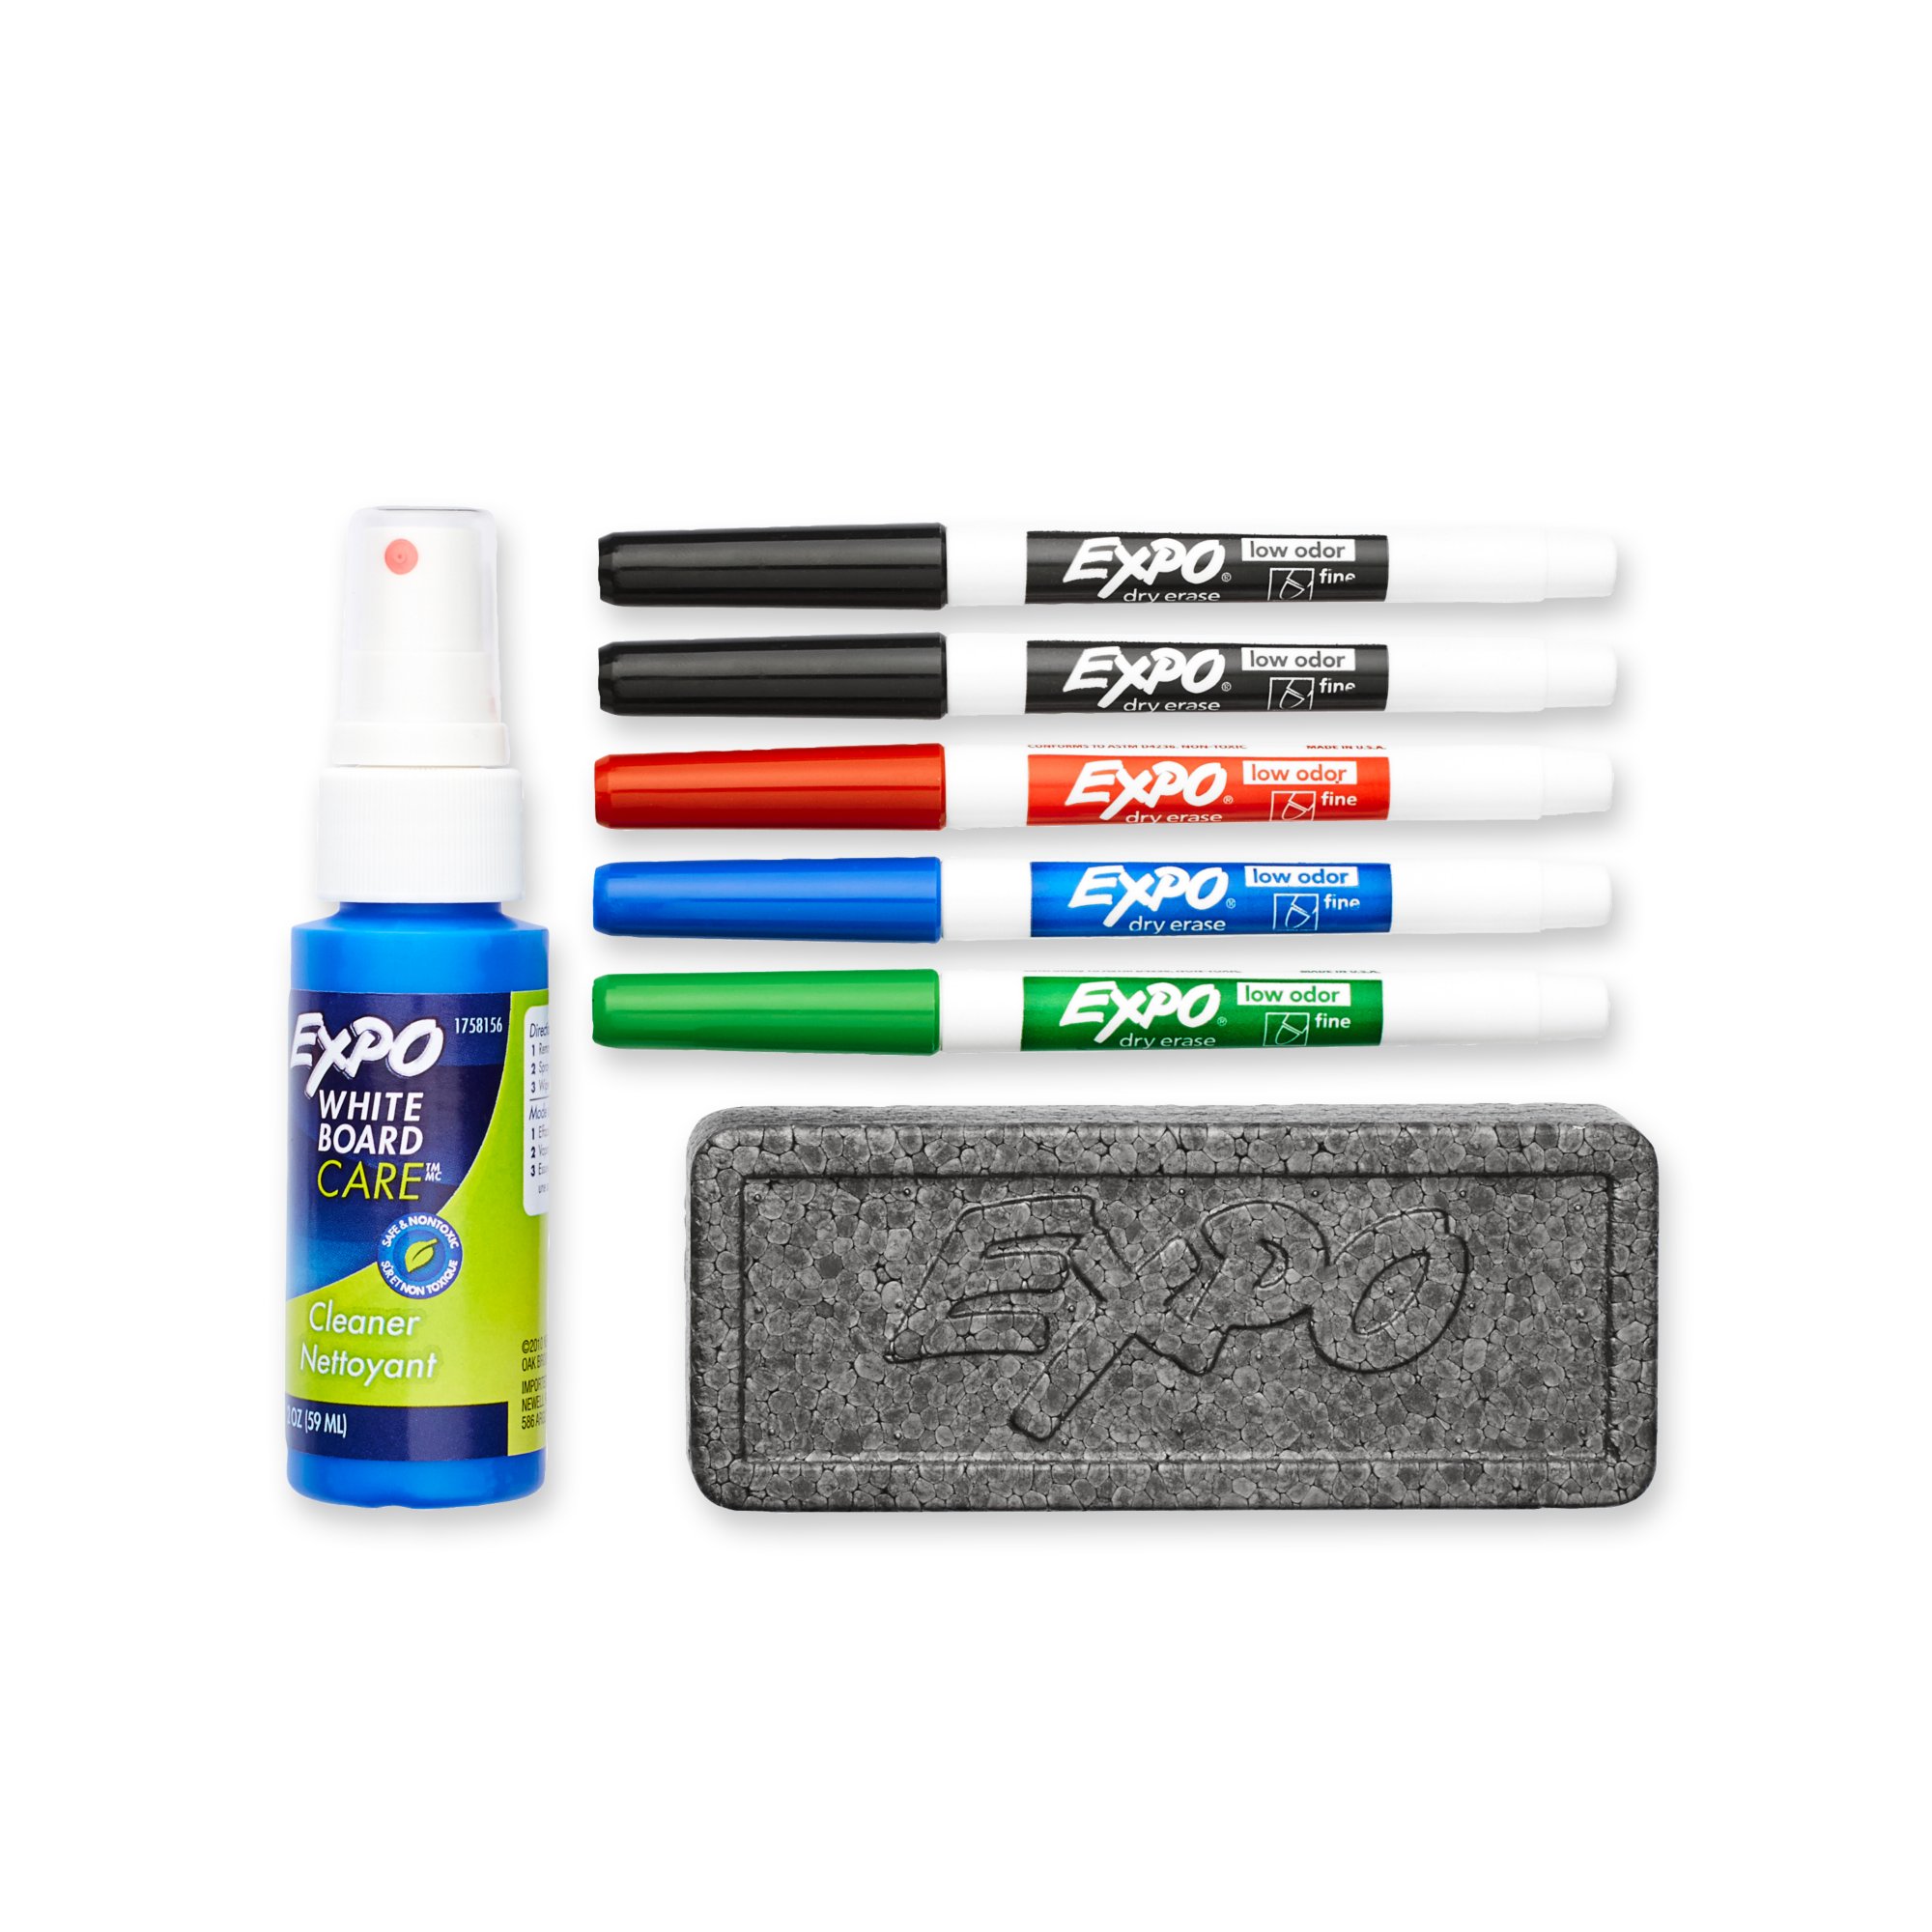 EXPO White Board Care Cleaner